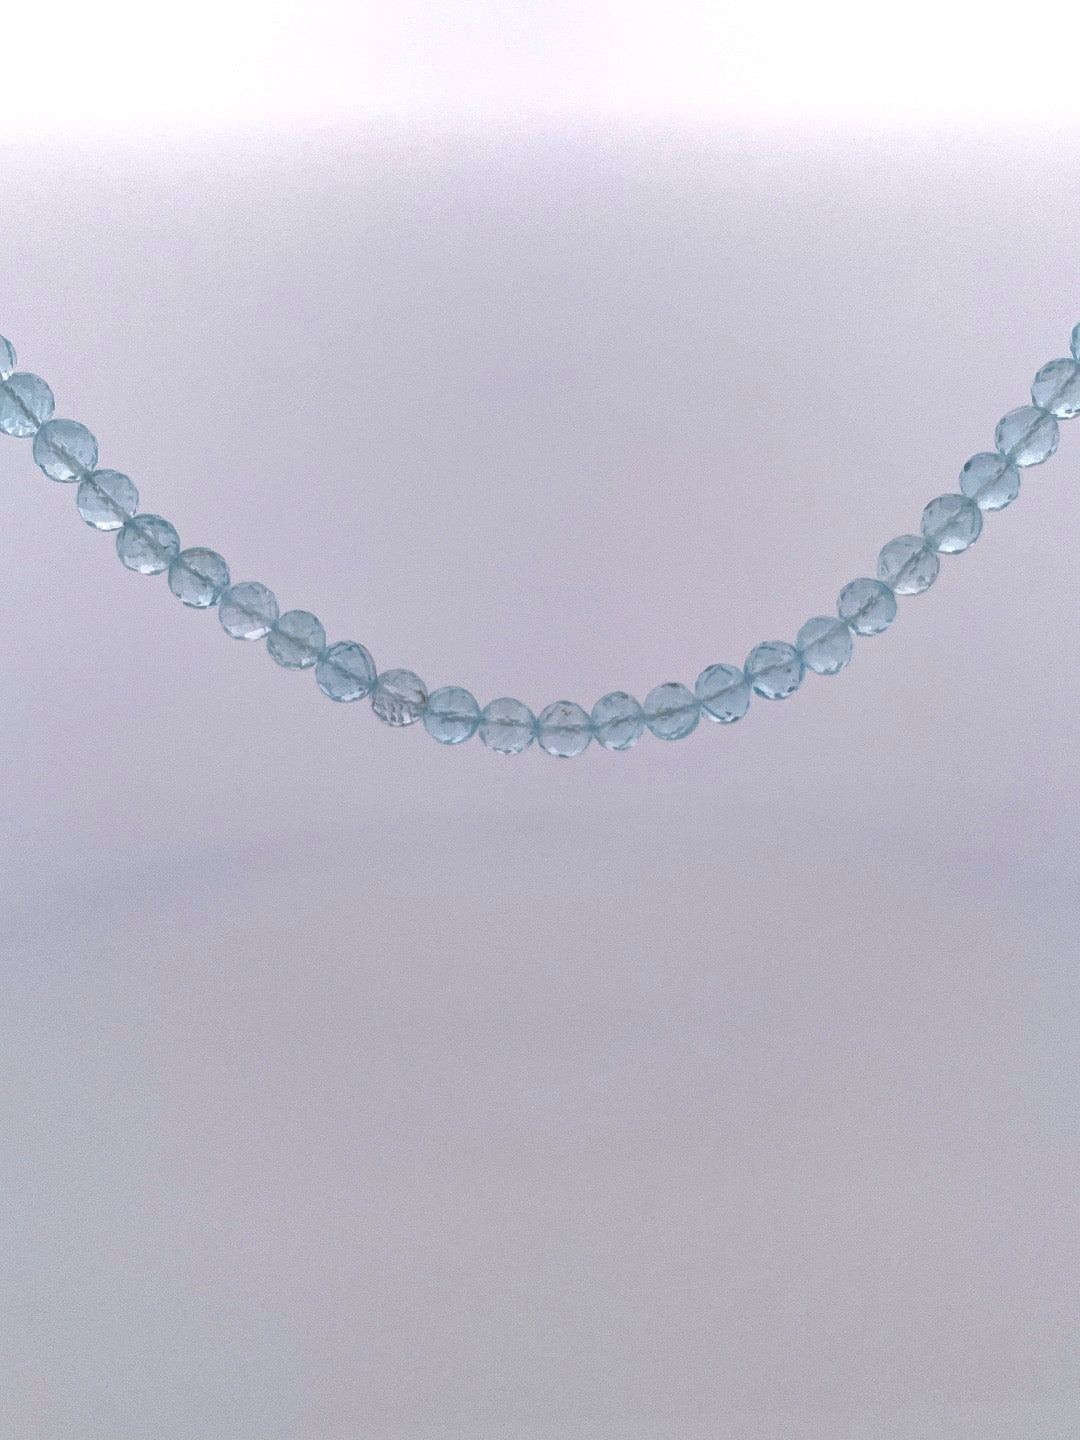 PB346 Blue Topaz 18" Faceted beads